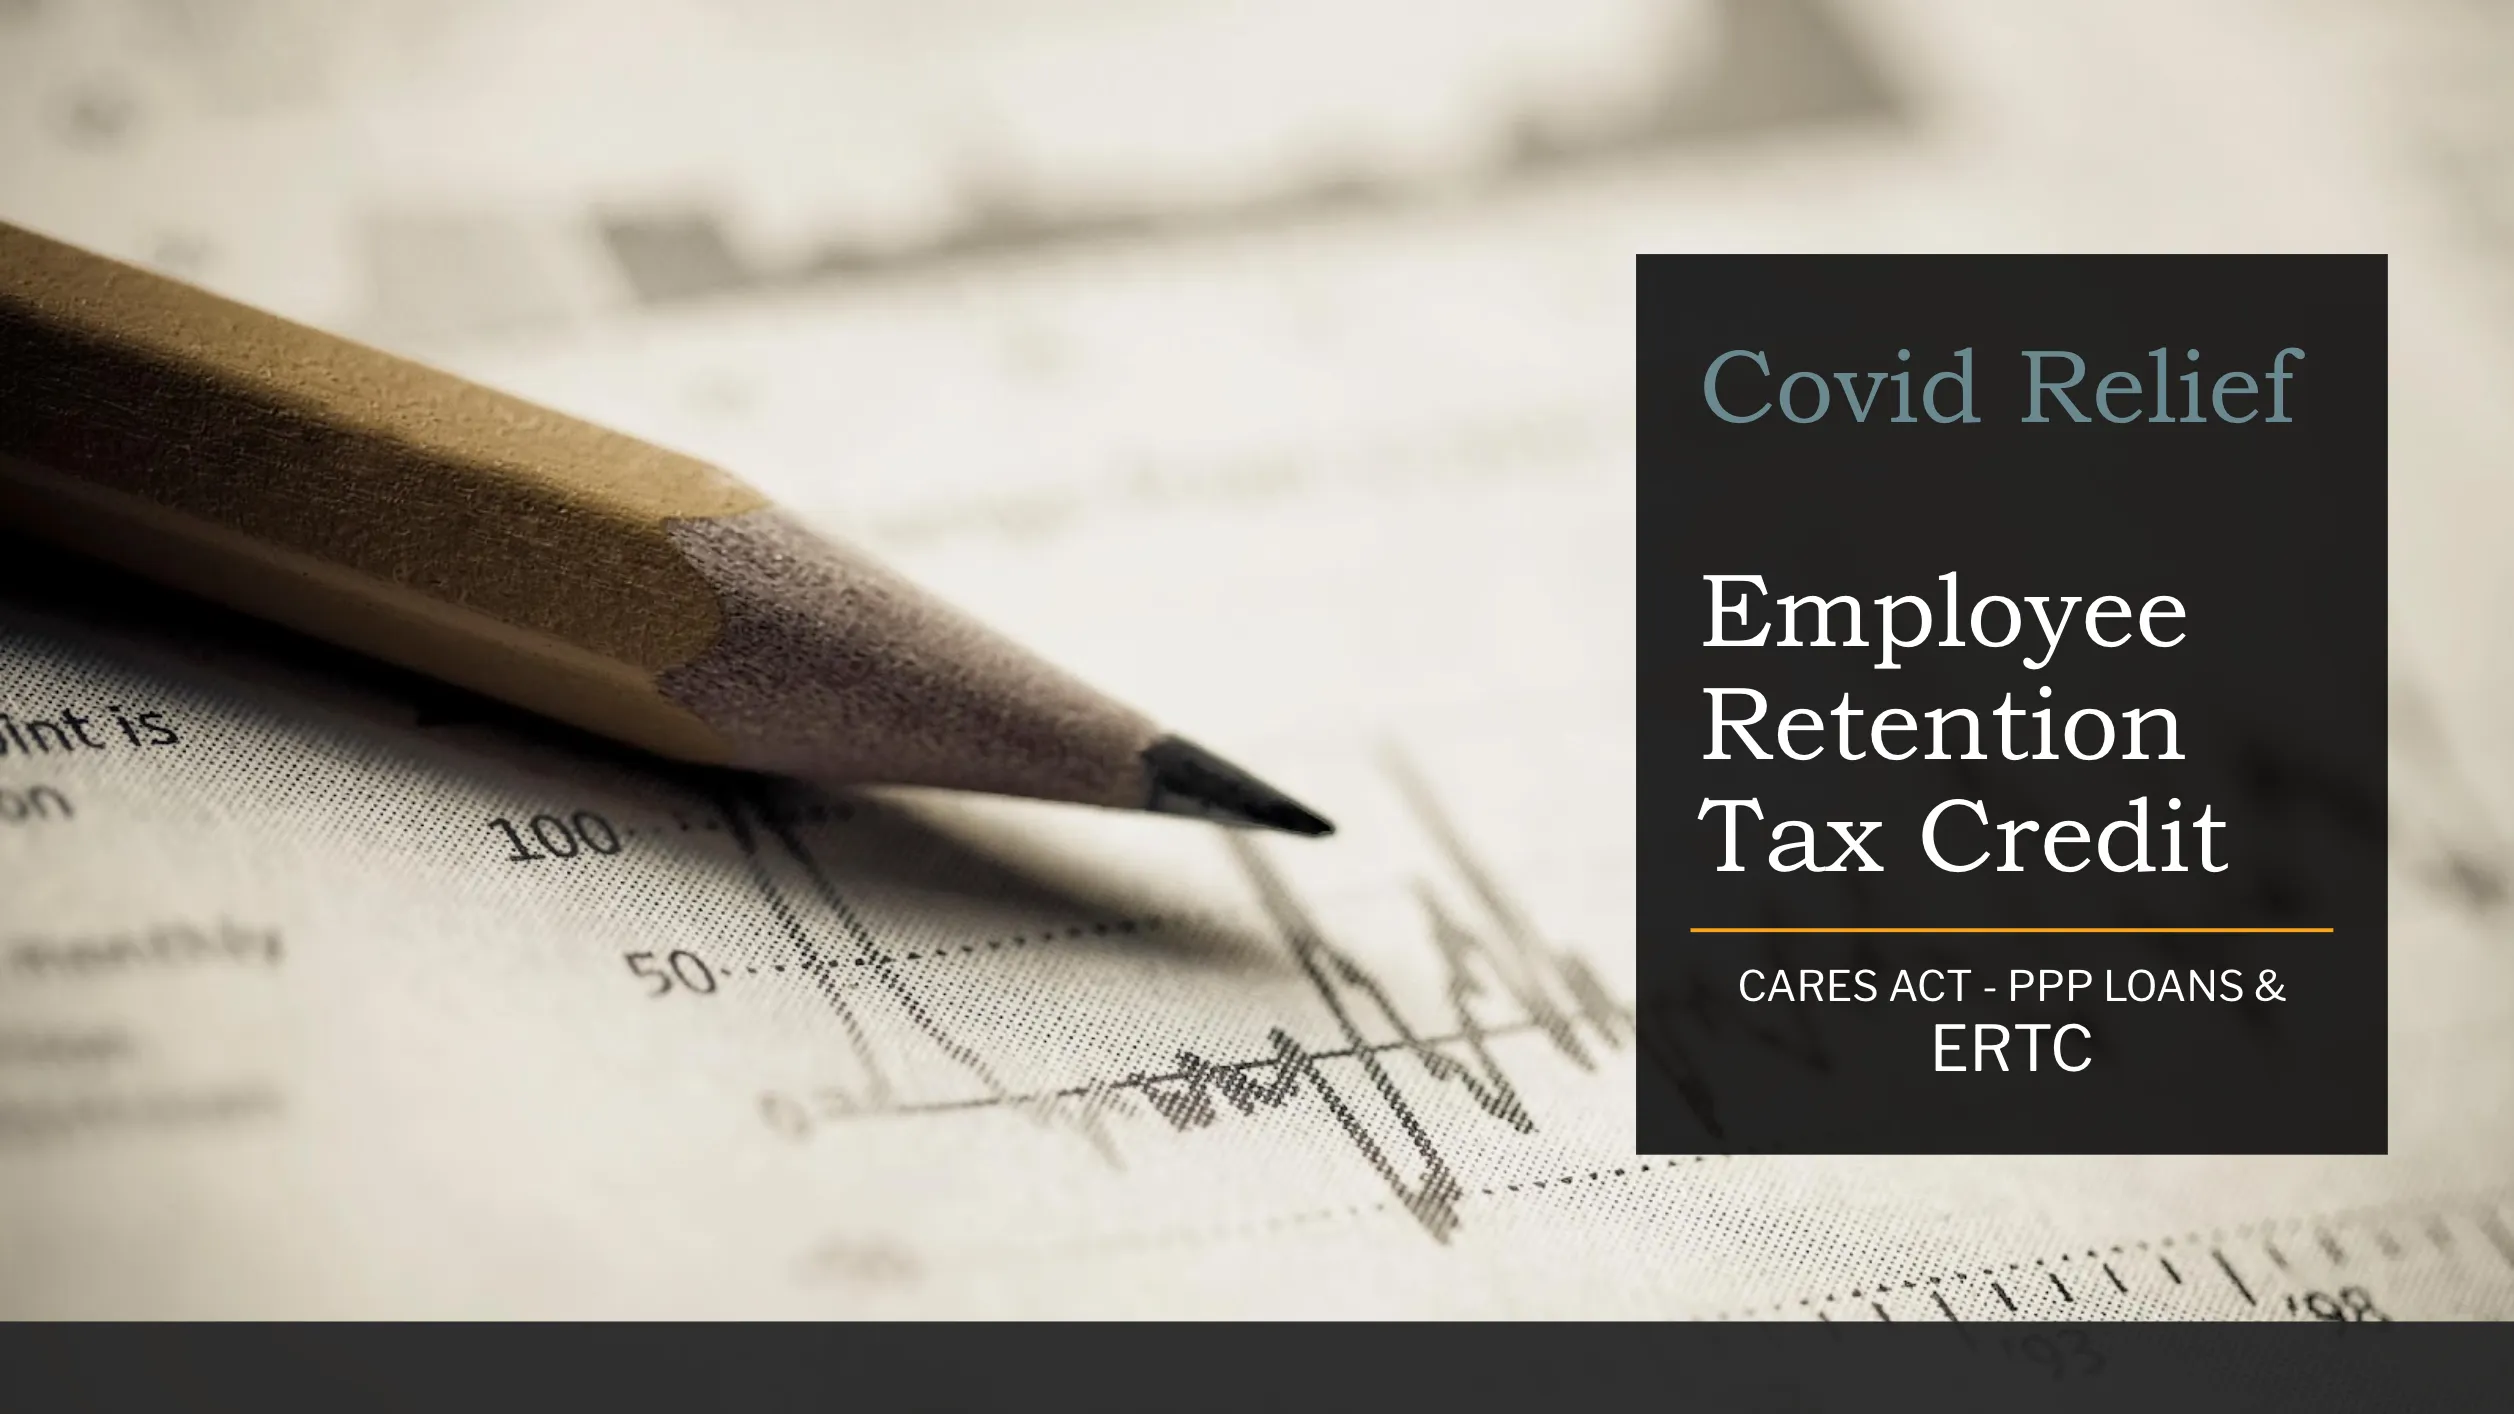 Employee Retention Tax Credit Overview